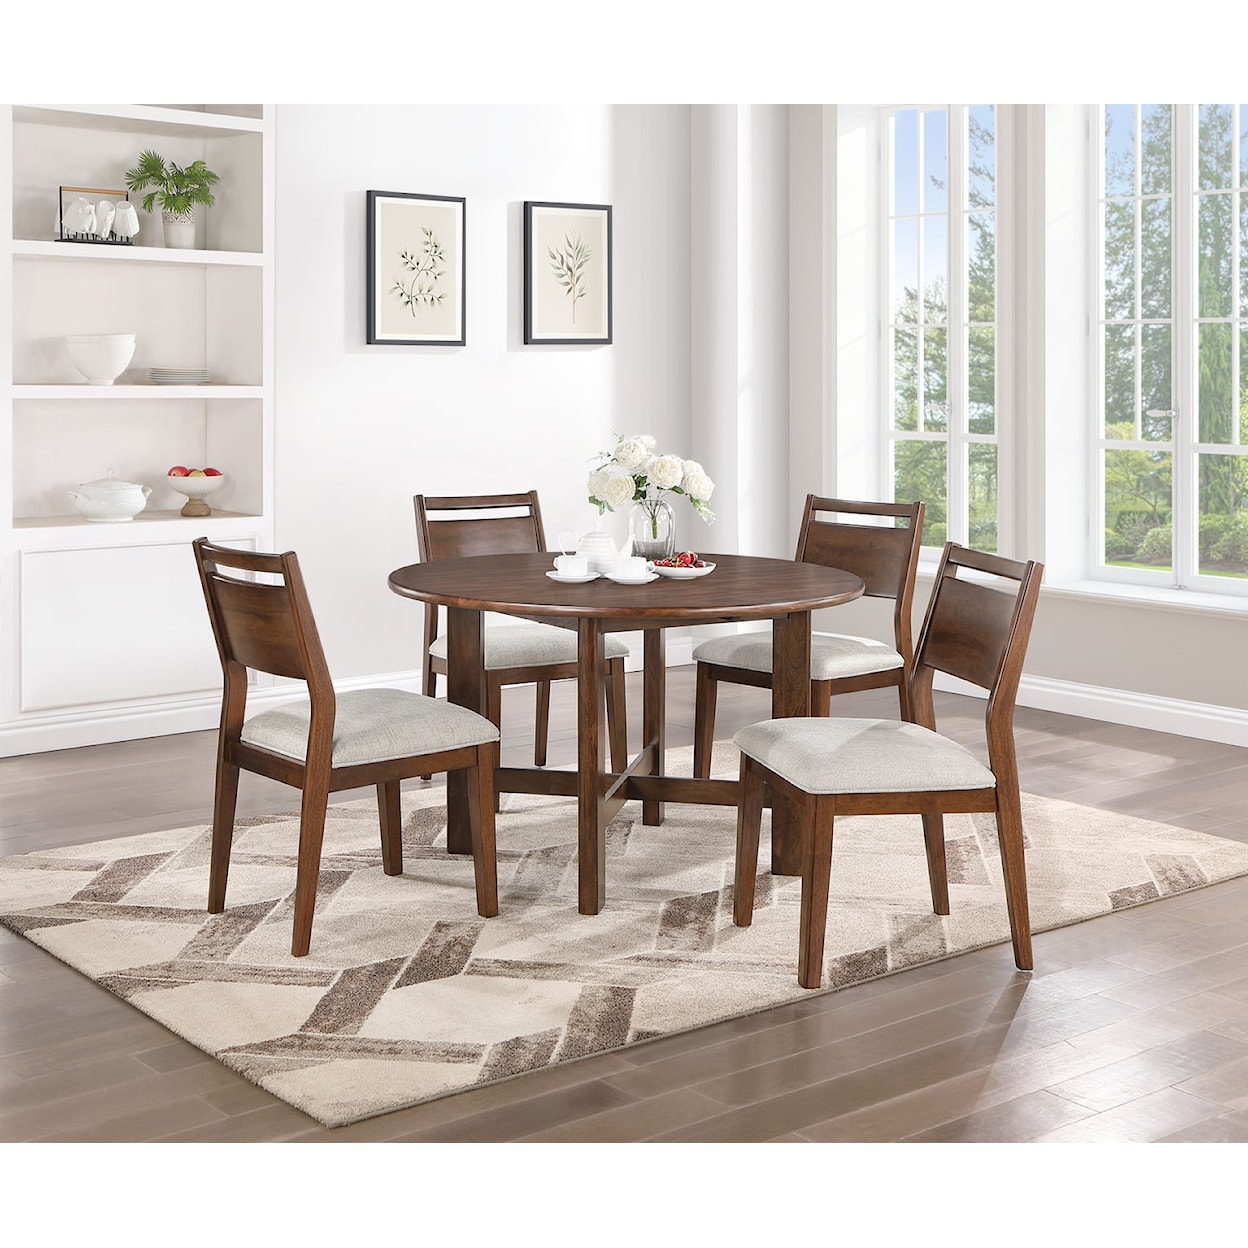 HH Paladin Round Dining Table